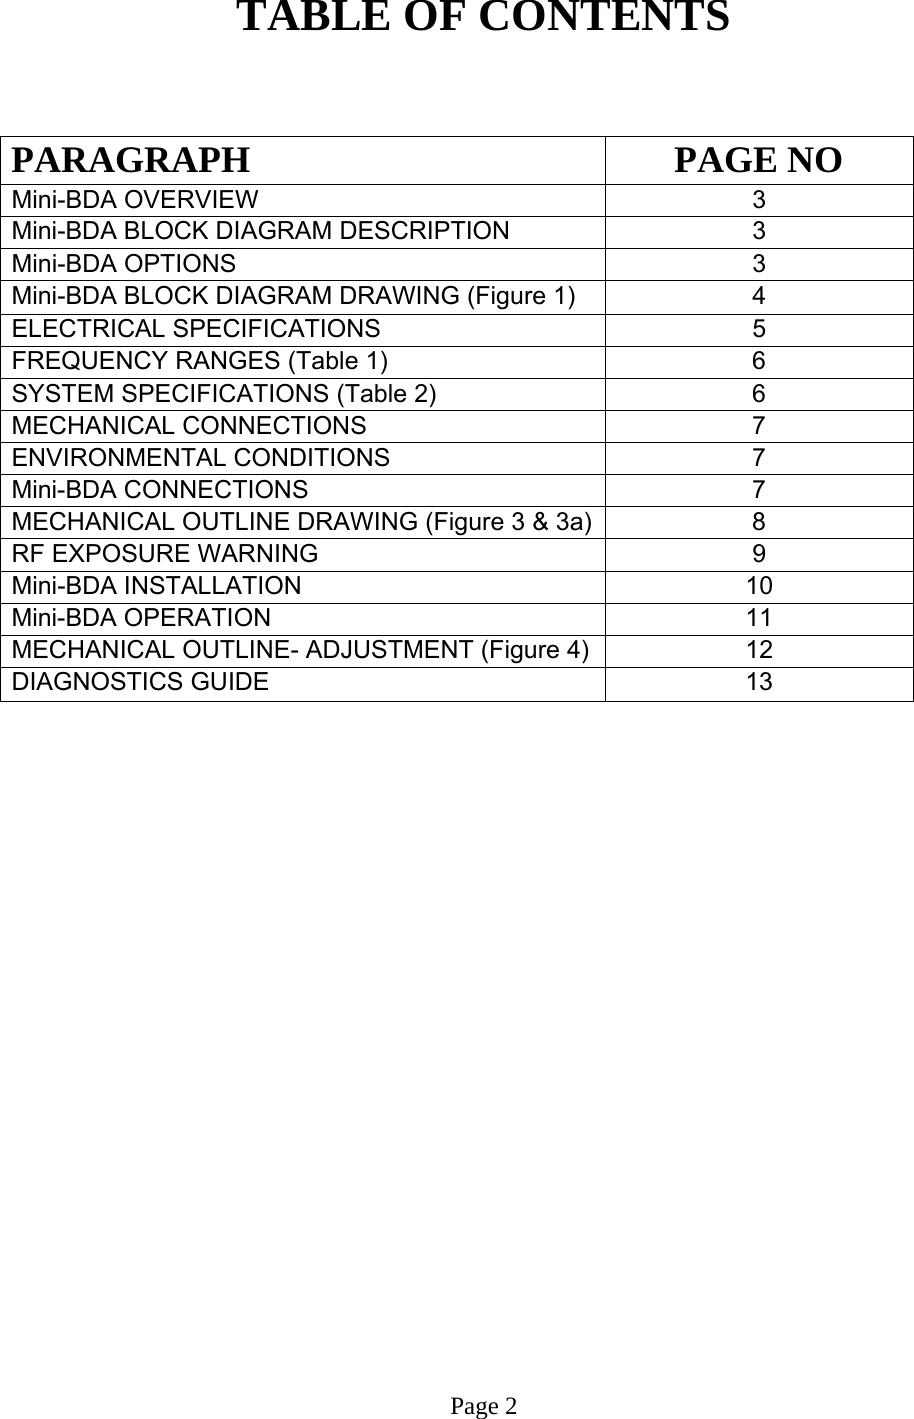  TABLE OF CONTENTS   PARAGRAPH PAGE NO Mini-BDA OVERVIEW   3 Mini-BDA BLOCK DIAGRAM DESCRIPTION 3 Mini-BDA OPTIONS  3 Mini-BDA BLOCK DIAGRAM DRAWING (Figure 1)  4 ELECTRICAL SPECIFICATIONS     5  FREQUENCY RANGES (Table 1)  6 SYSTEM SPECIFICATIONS (Table 2)  6 MECHANICAL CONNECTIONS  7  ENVIRONMENTAL CONDITIONS   7  Mini-BDA CONNECTIONS   7 MECHANICAL OUTLINE DRAWING (Figure 3 &amp; 3a) 8 RF EXPOSURE WARNING   9  Mini-BDA INSTALLATION  10  Mini-BDA OPERATION 11  MECHANICAL OUTLINE- ADJUSTMENT (Figure 4)  12  DIAGNOSTICS GUIDE  13                          Page 2 